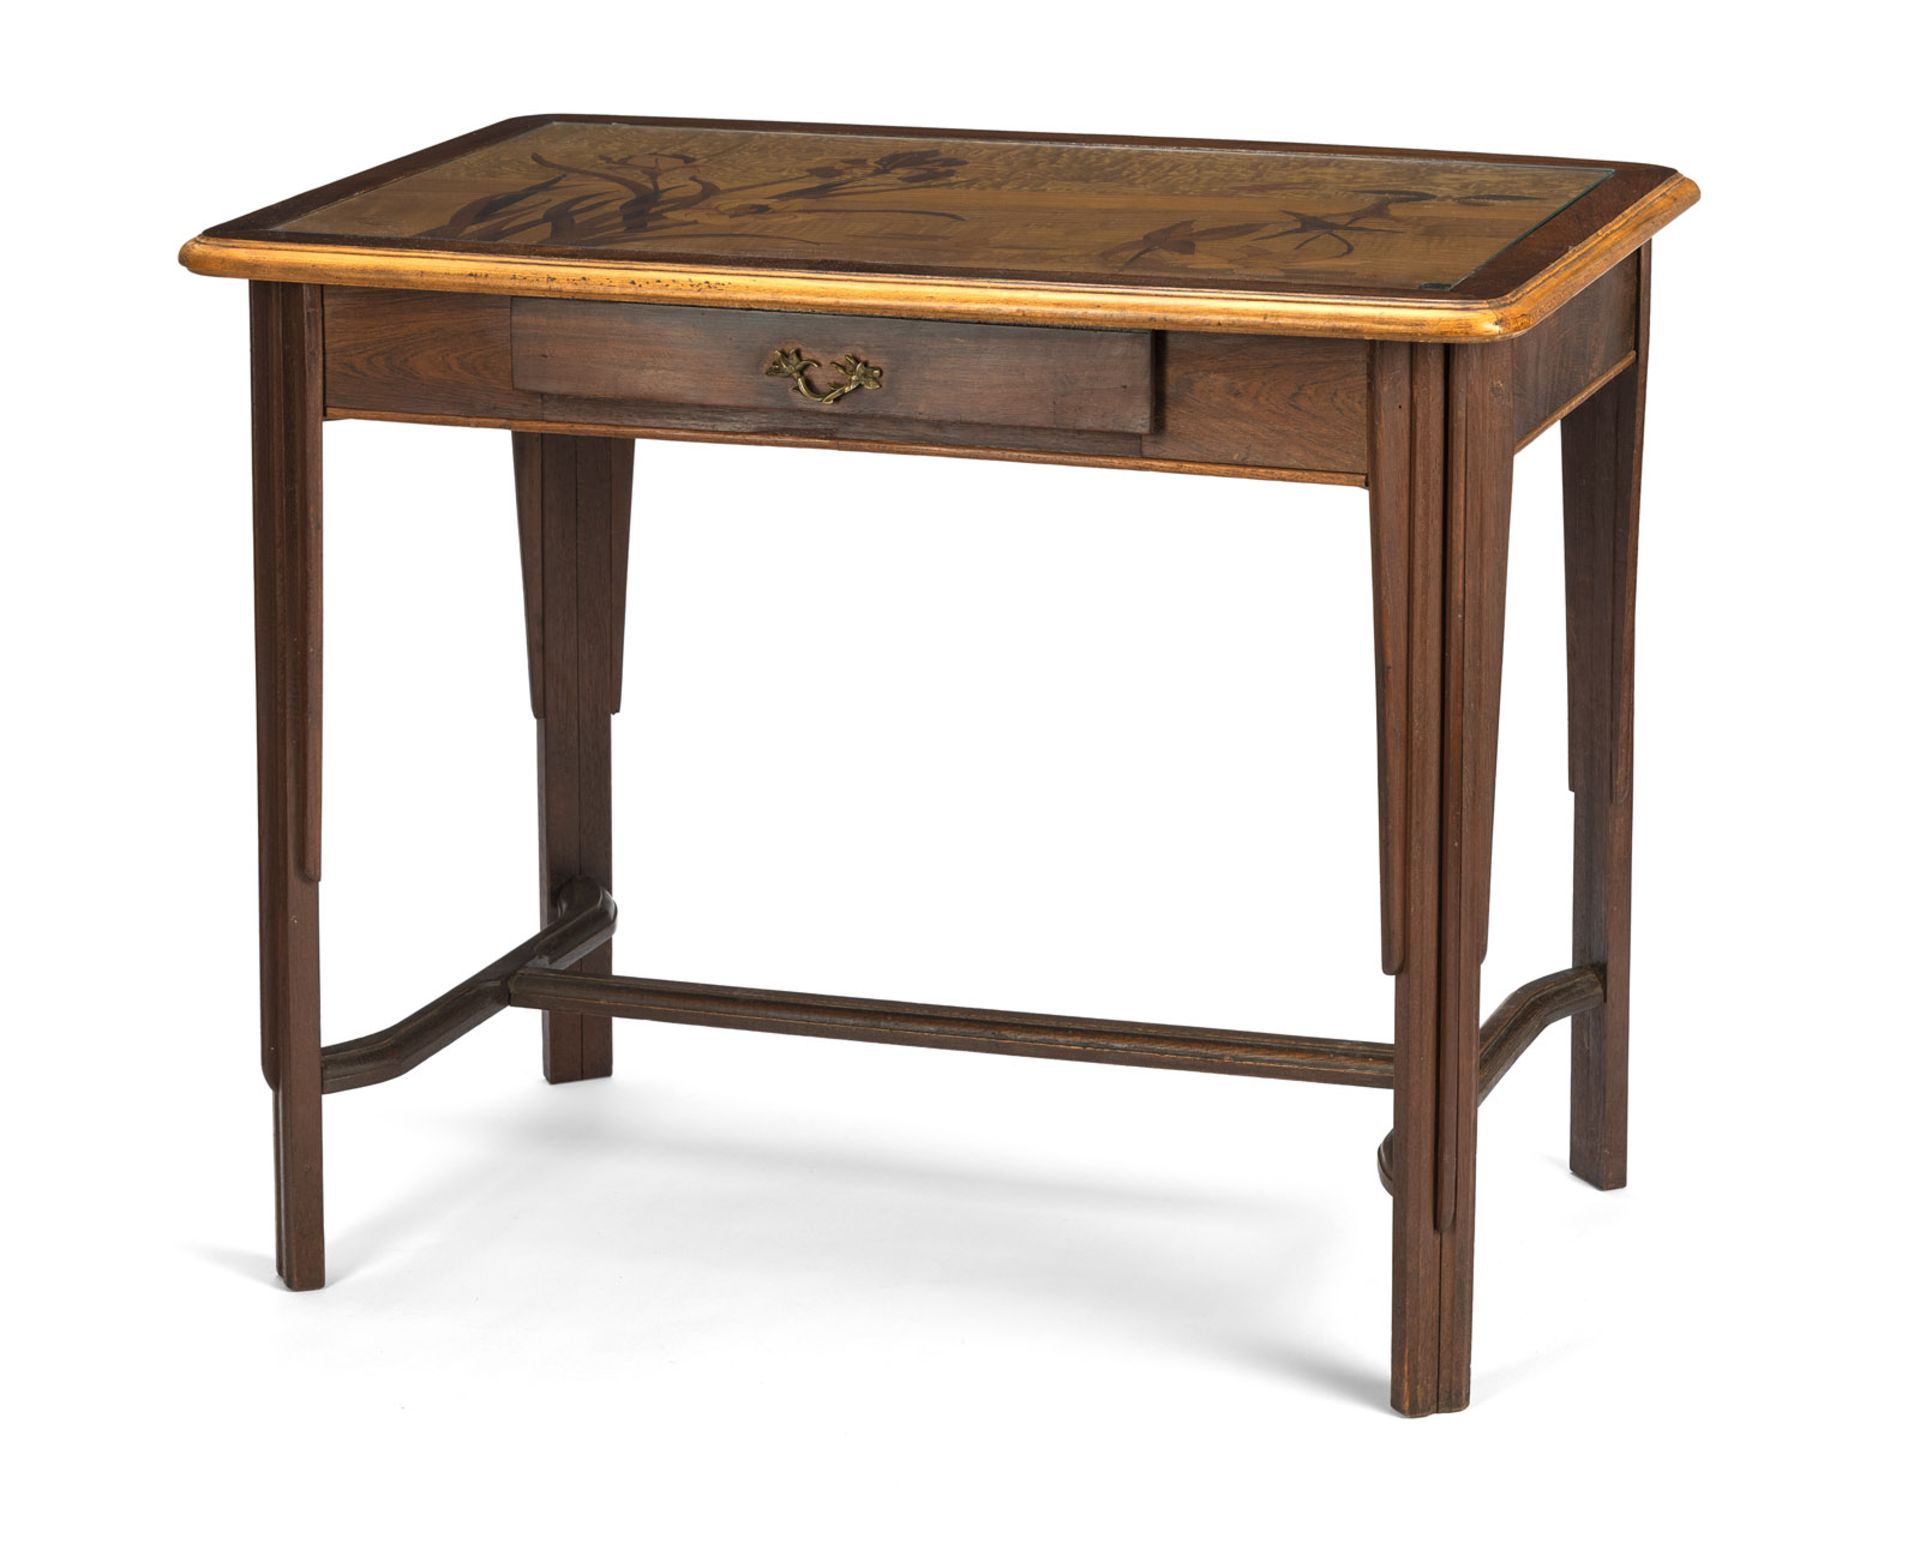 AN ART NOUVEAU FLORAL TOOLED PALISANDER, OAKWOOD, MAHOGANY, ROOTWOOD AND ASH WRITING DESK